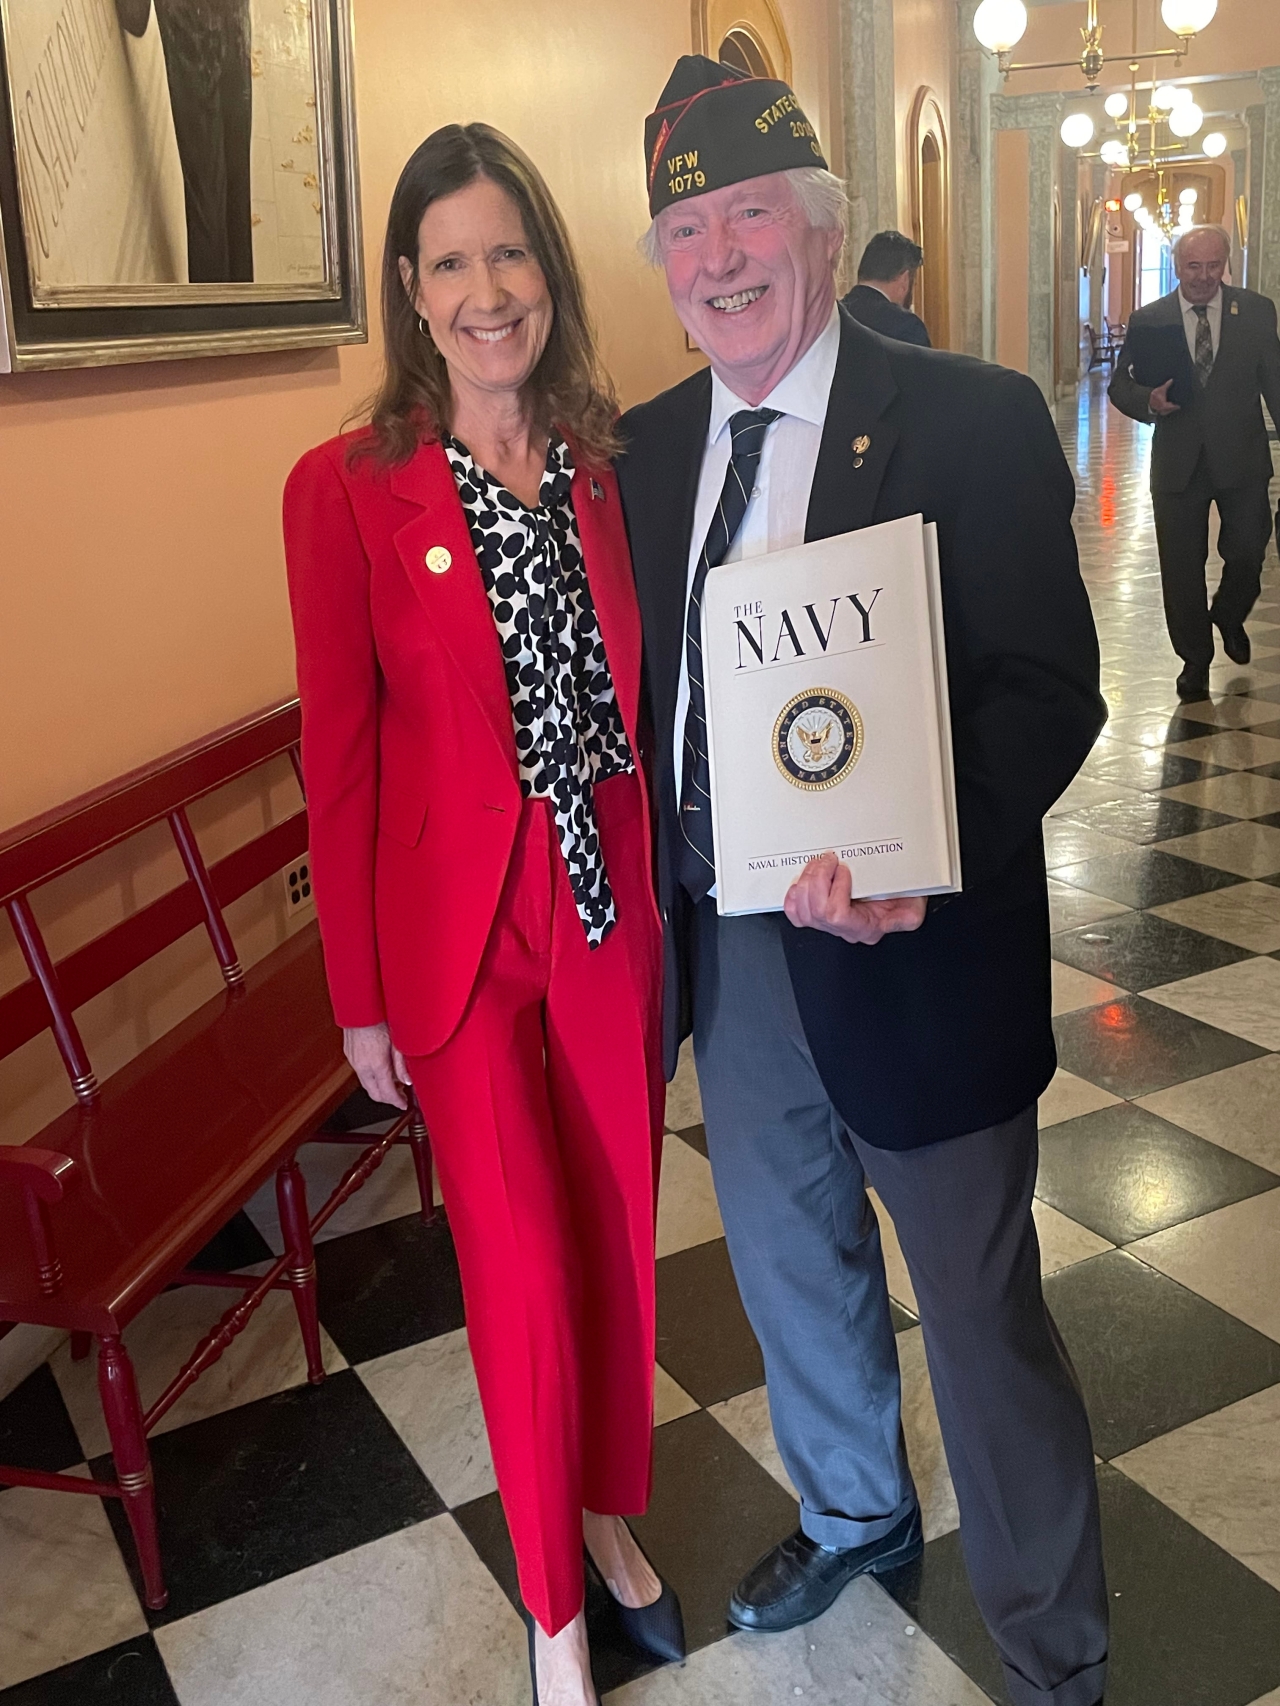 Representative Richardson joined David Root, past State Commander of the Department of Ohio Veterans of Foreign Wars, after he provided testimony in support of her legislation, H.B. 254.